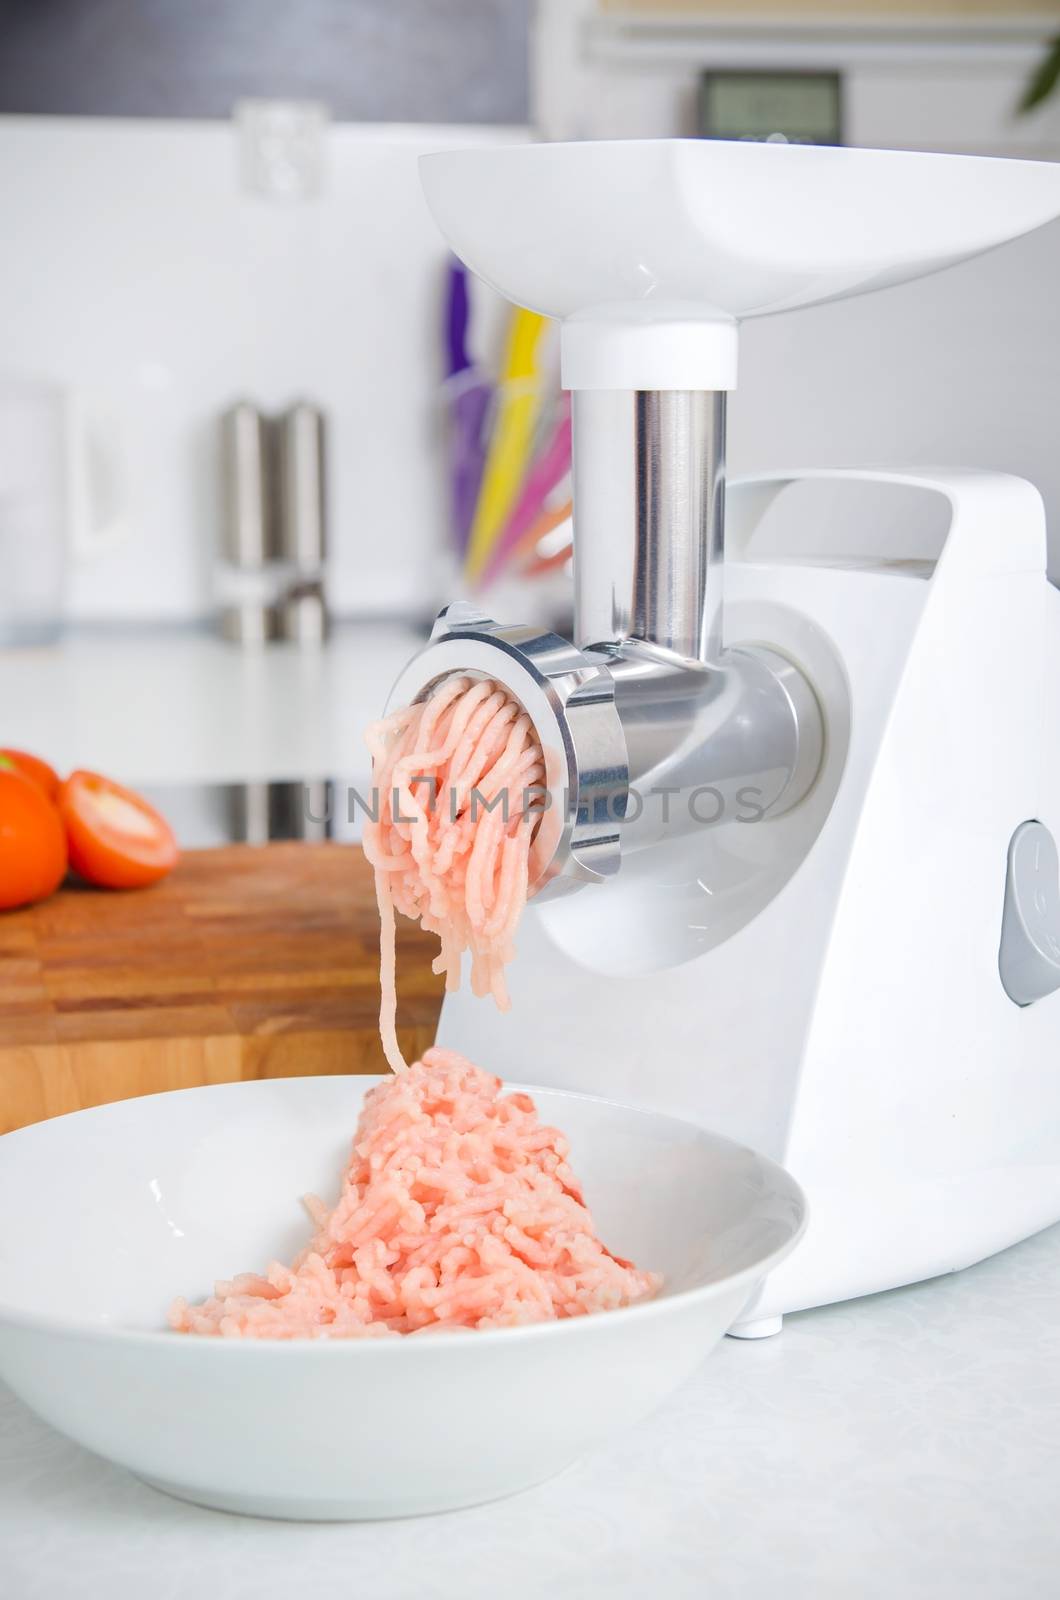 Grinder with minced meat in modern kitchen by simpson33